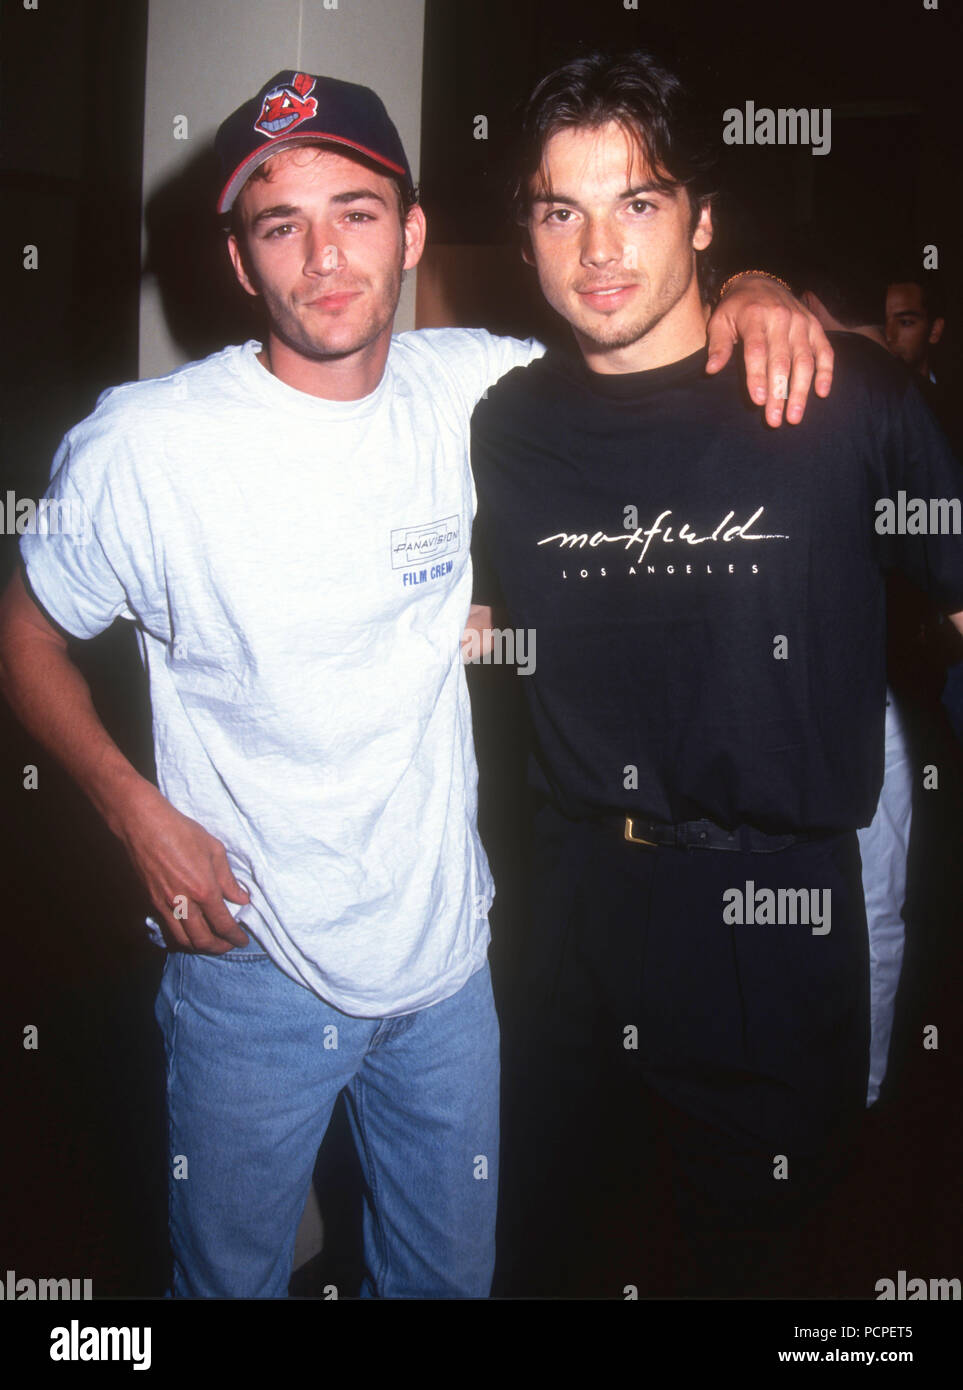 HOLLYWOOD, CA - MAY 30: (L-R) Actors Luke Perry and Jason Gedrick attend the First Annual Celebrity Pool Tournament to Benefit AIDS Project Los Angeles (APLA) on May 30, 1992 at the Hollywood Athletic Club in Hollywood, California. Photo by Barry King/Alamy Stock Photo Stock Photo